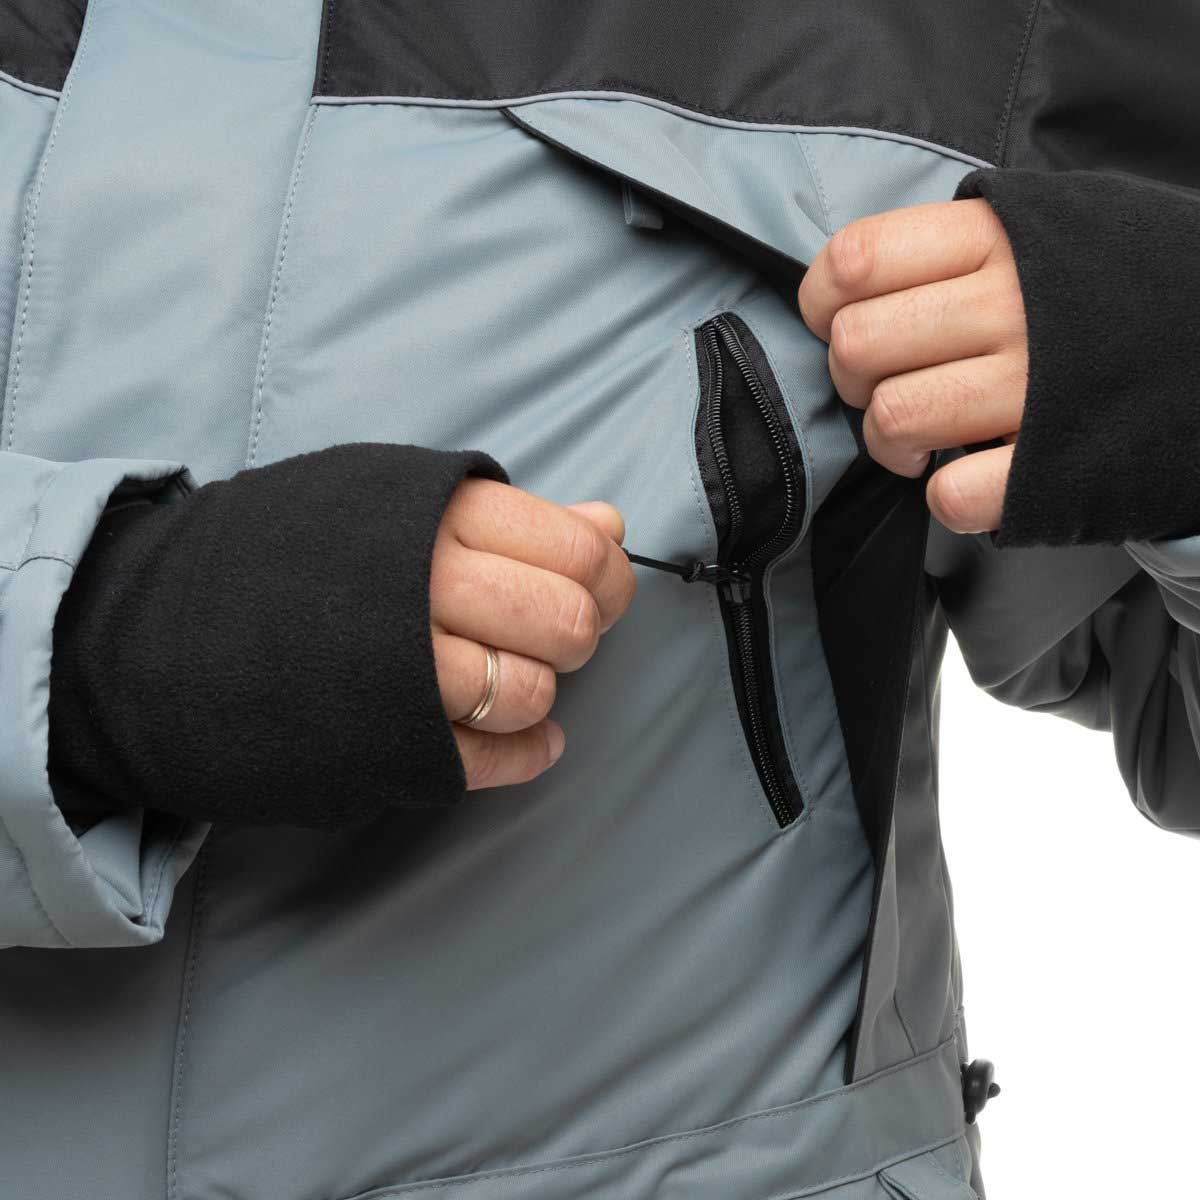 Angler Pro Jacket and Bibs Windproof Winter Set for Men is equipped with the zipper pockets which could keep your belongings safe